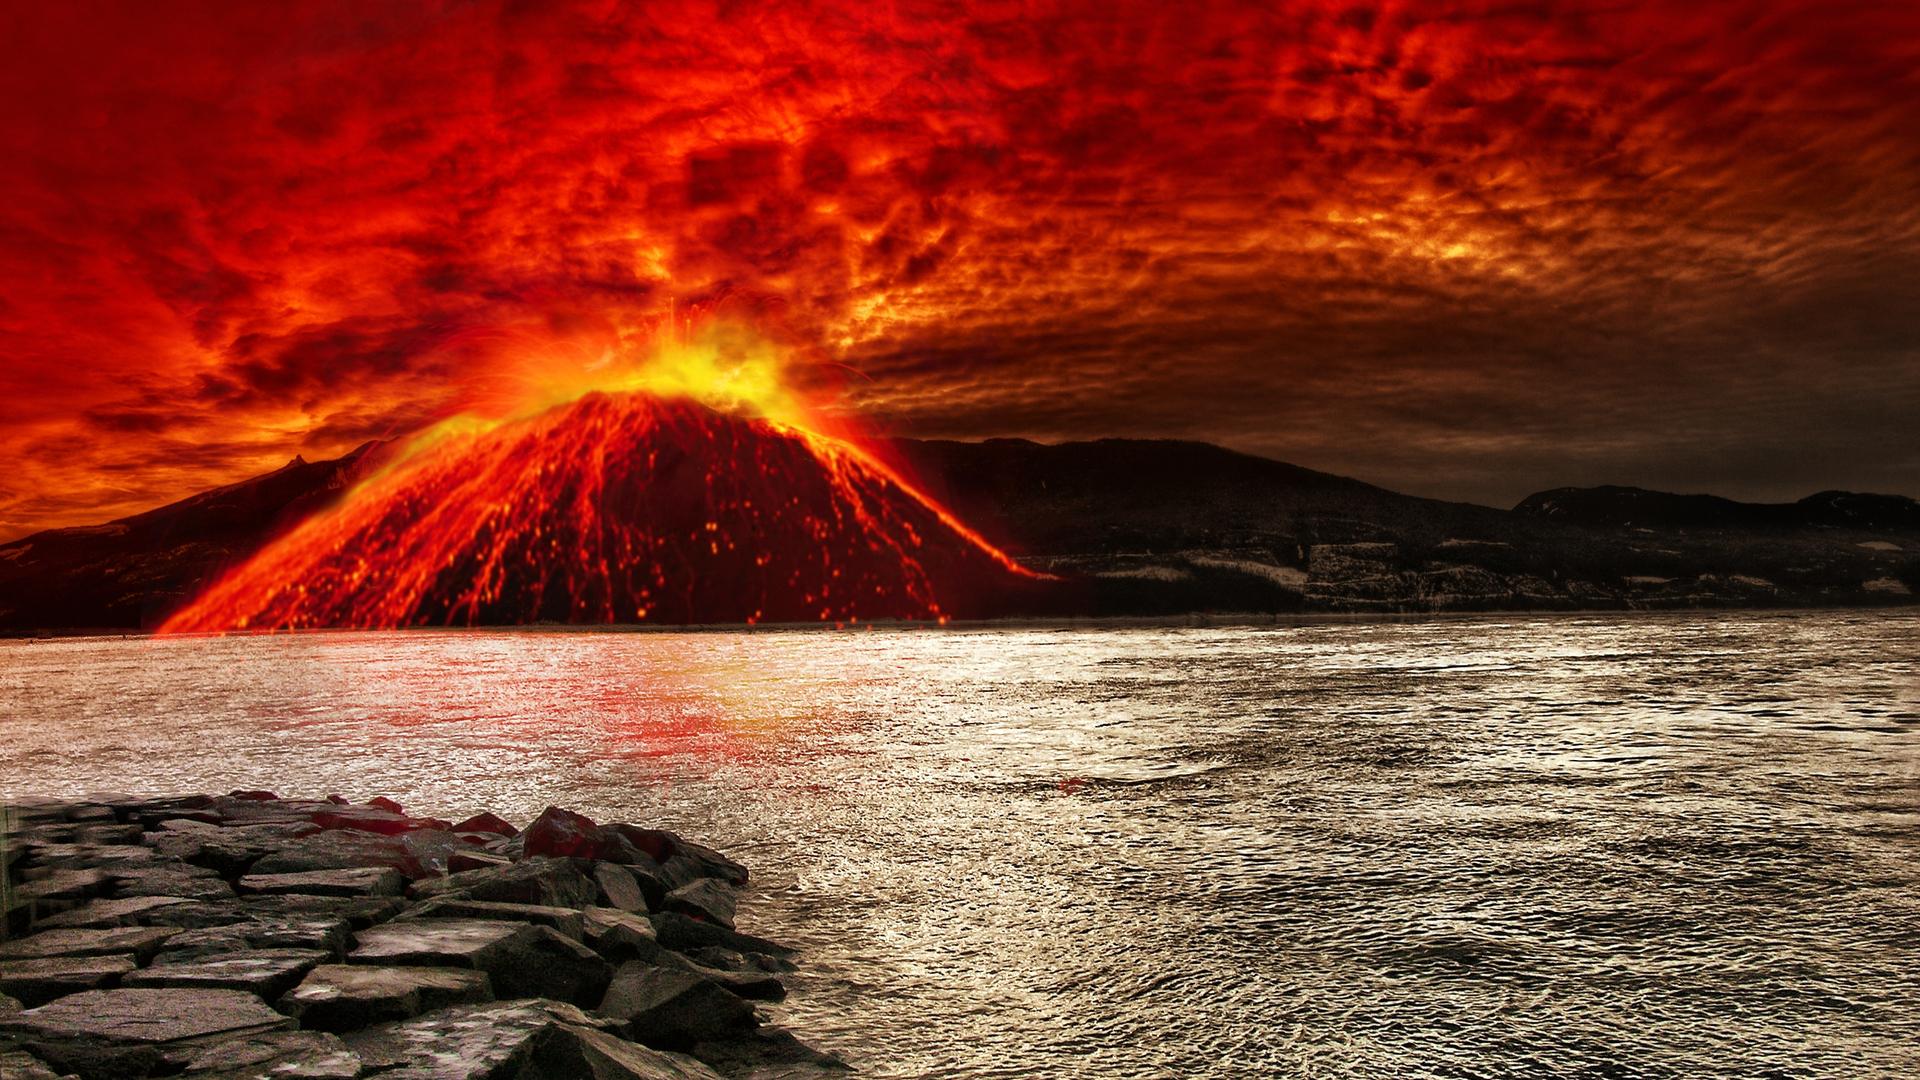 Amazing sky over volcanic eruption - (#129216) - High Quality and ...